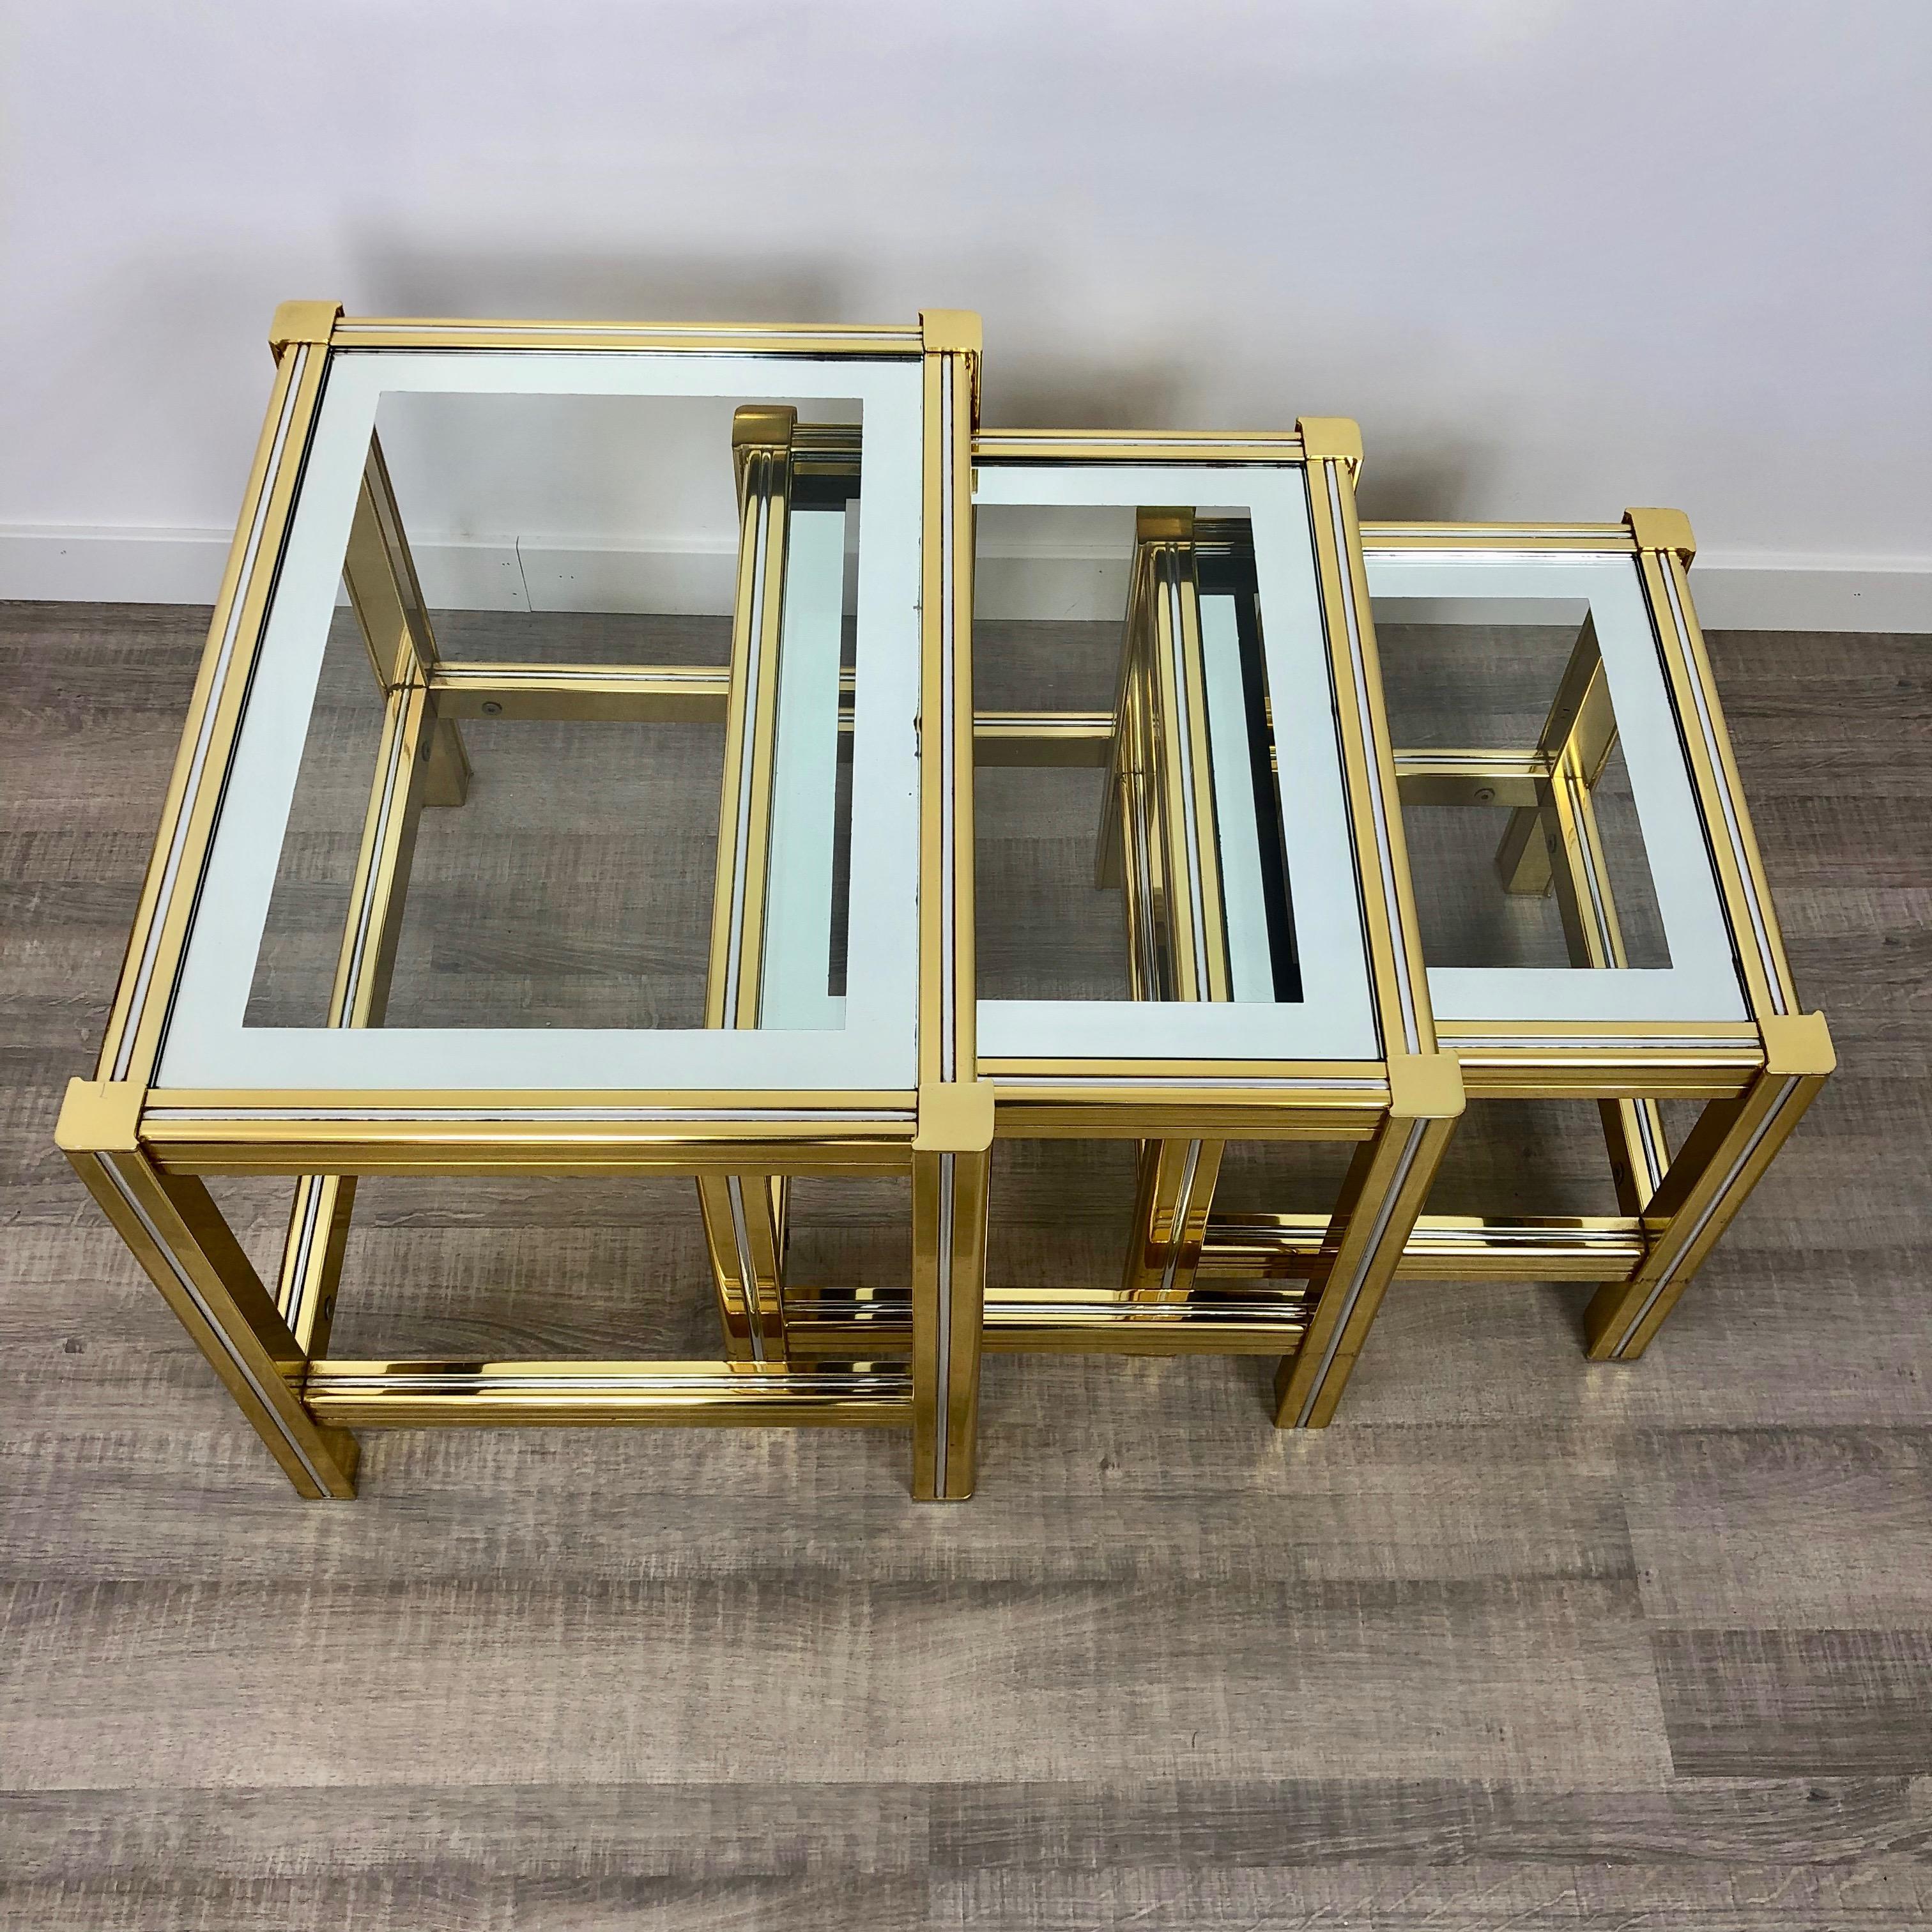 Tris of Increasing Dimensions Side Coffe Table in Brass, Glass and Chrome, 1970s For Sale 1